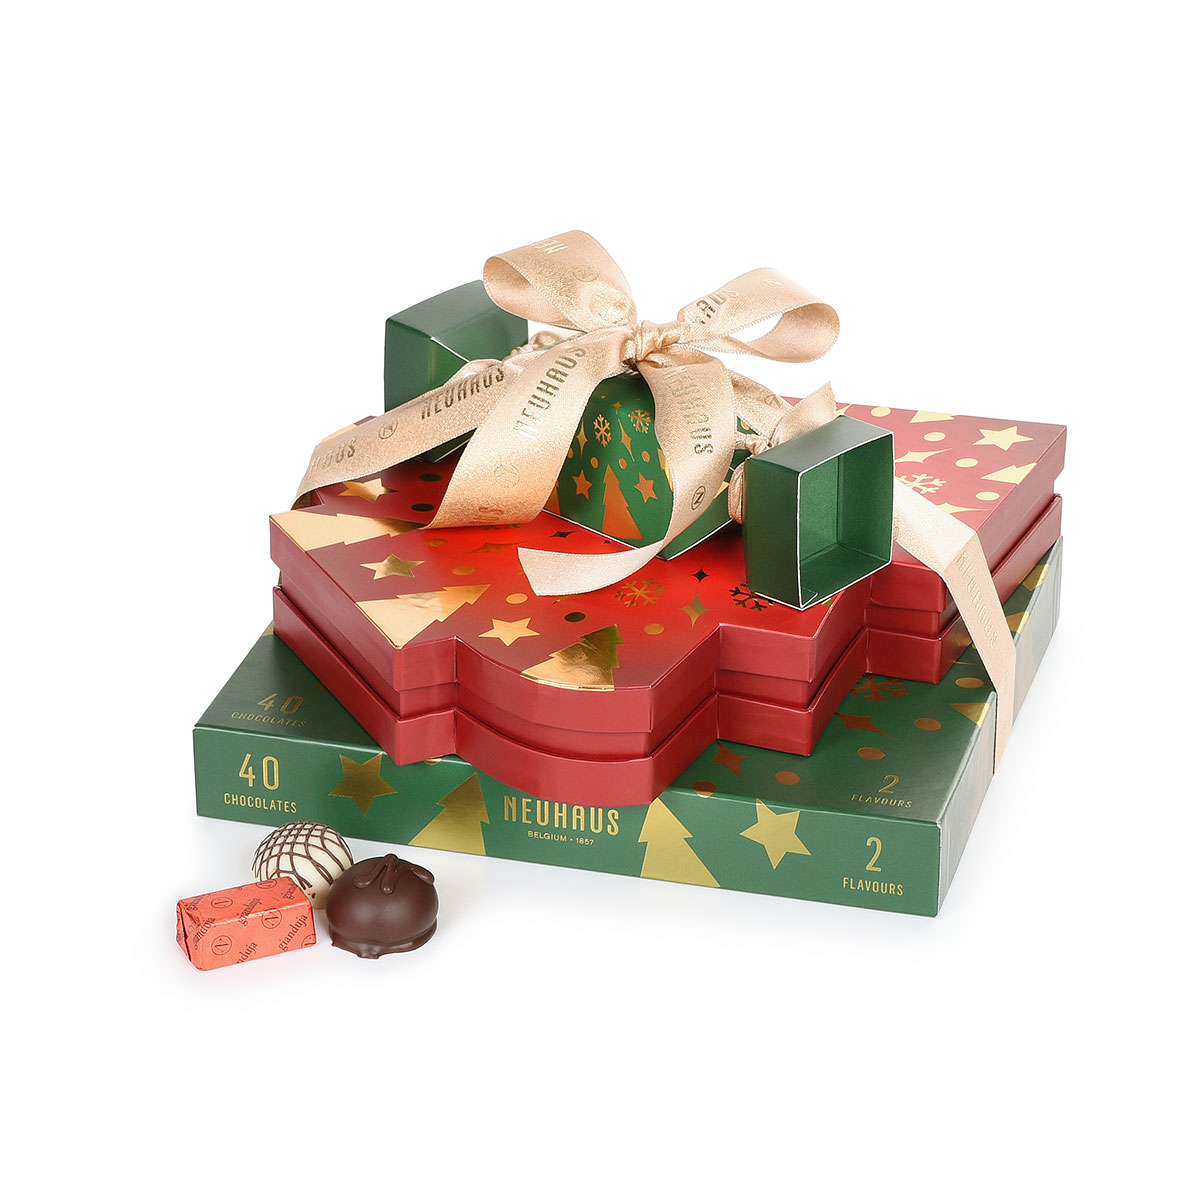 Neuhaus Gift Tower With Christmas Chocolates Delivery In Germany By Giftsforeurope